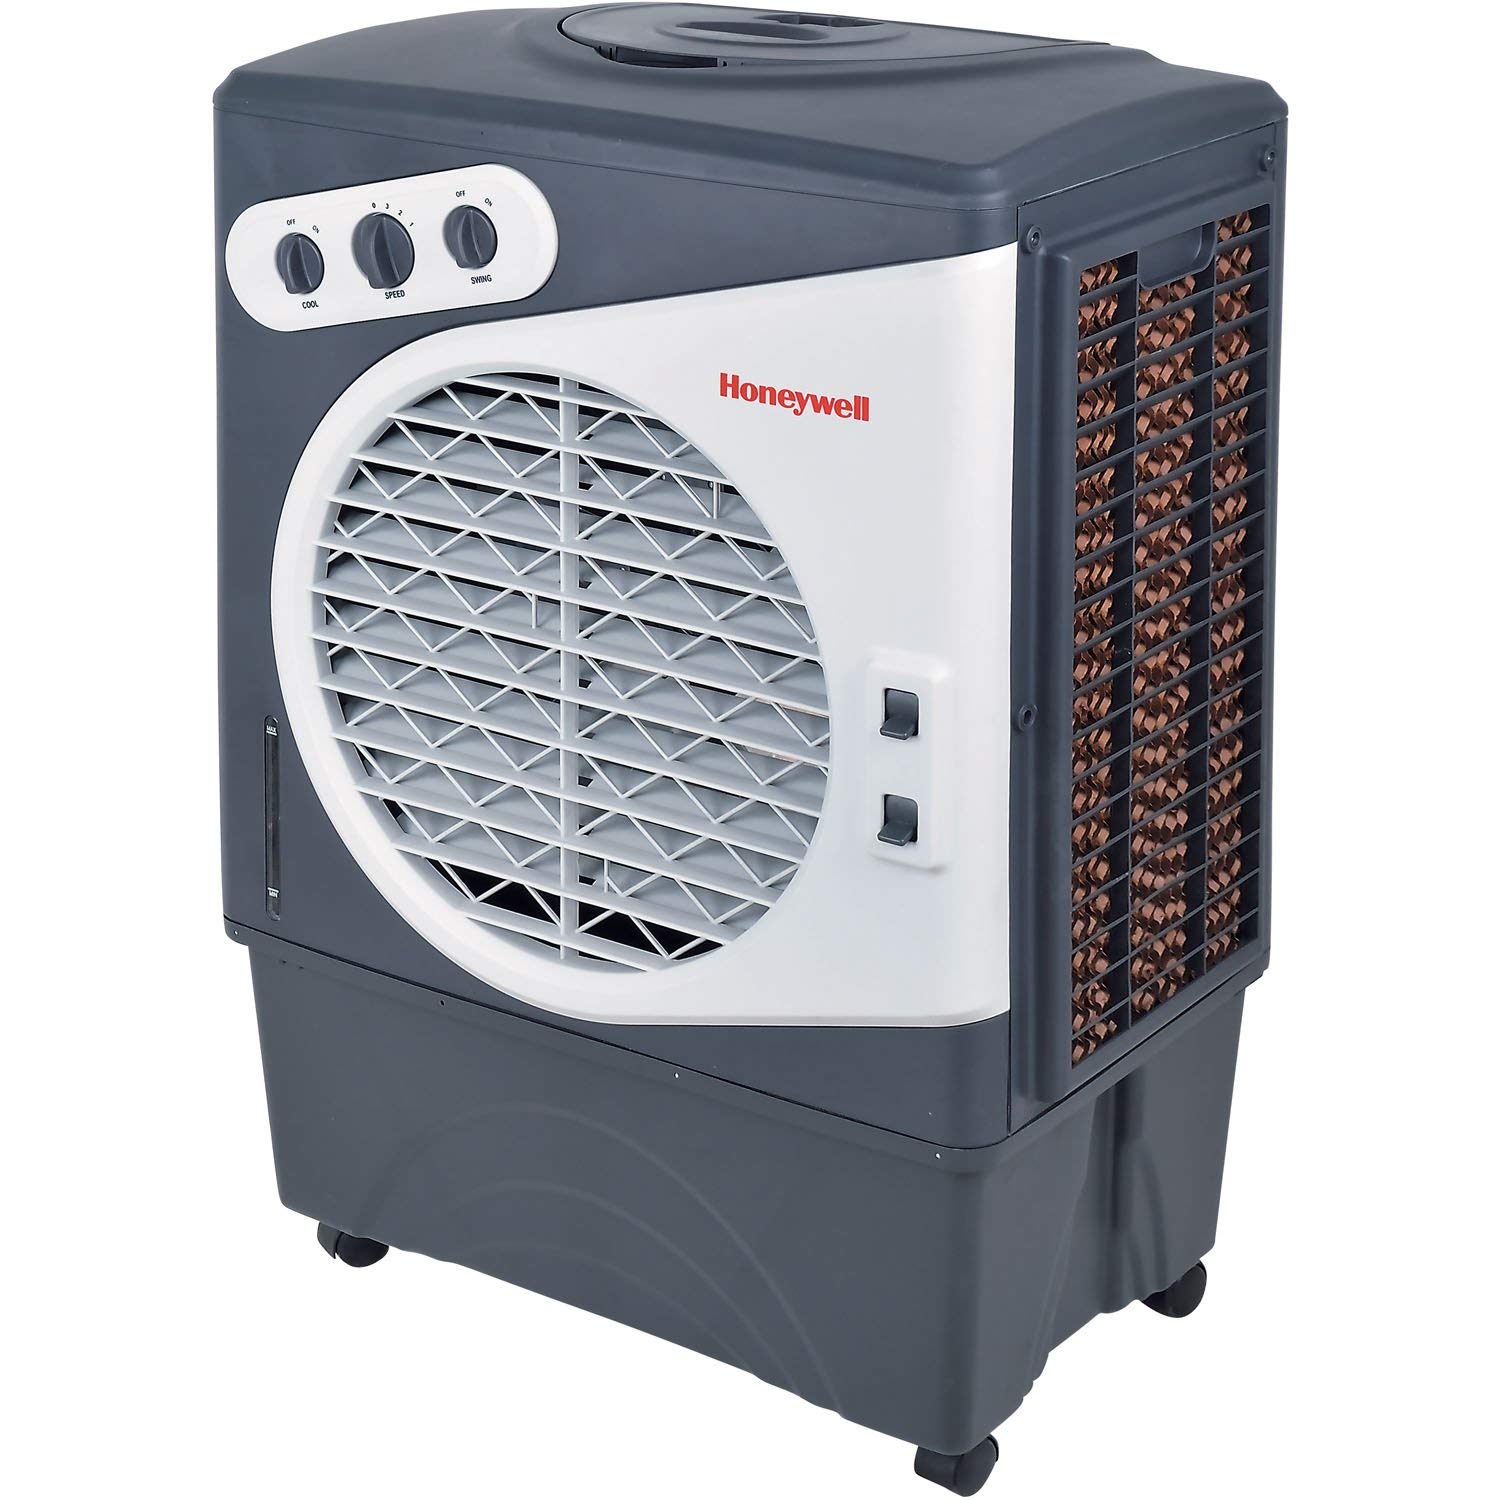 Honeywell Powerful Outdoor Portable Evaporative Cooler with Fan